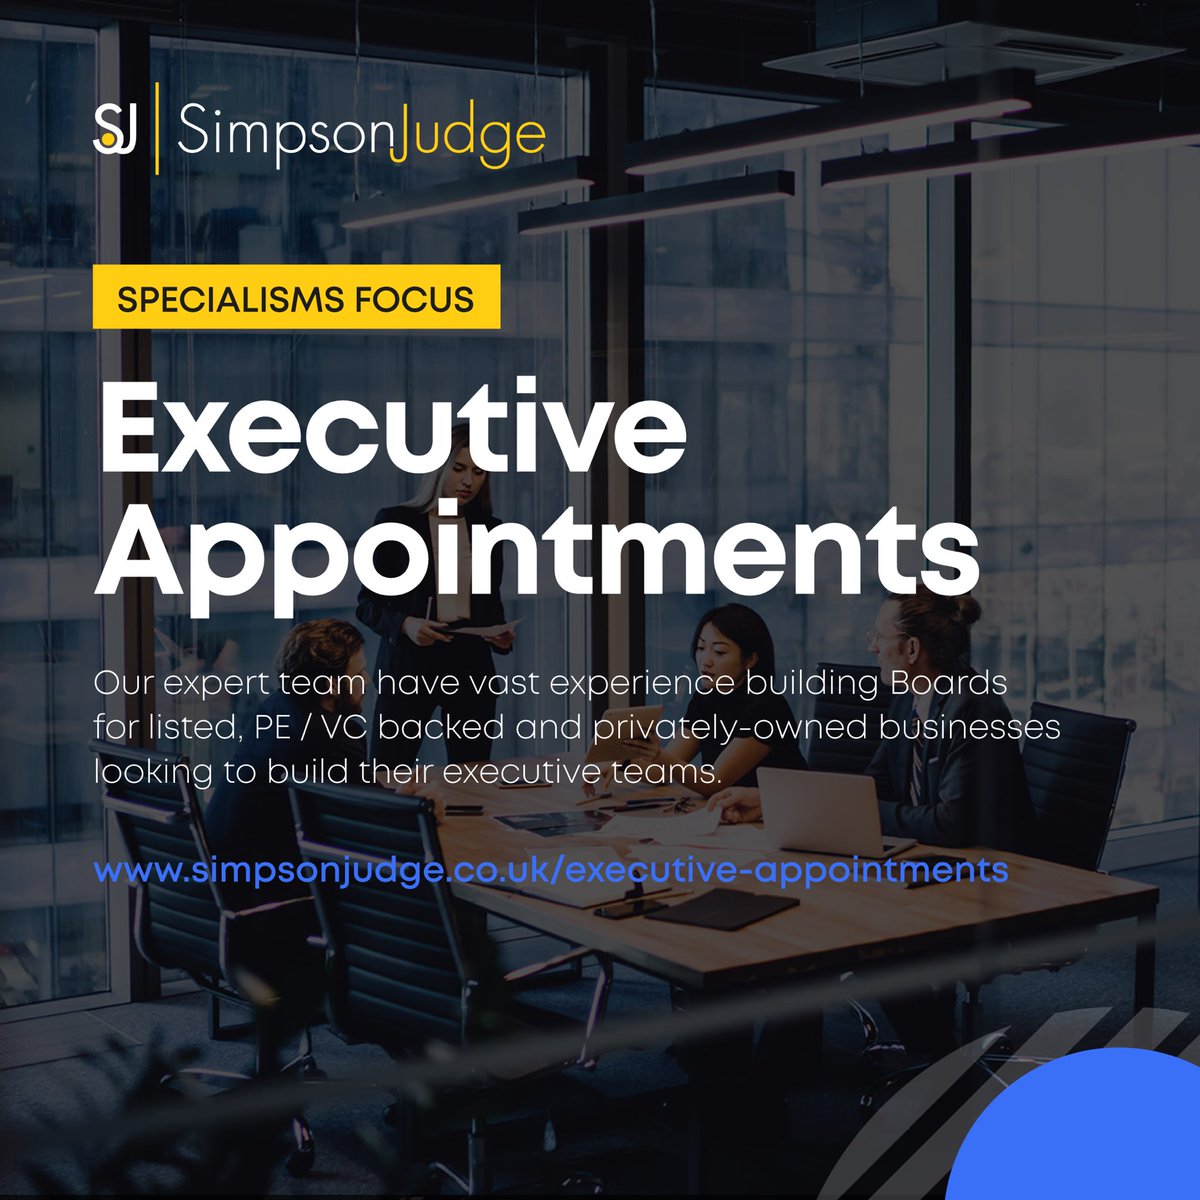 Executive Appts are very specific, requirements vary greatly across different organisations. Appts to the Board is a critical business decision, it is important that the correct appt is made. Our team will take time to understand your business to find the best candidate! #EAJobs